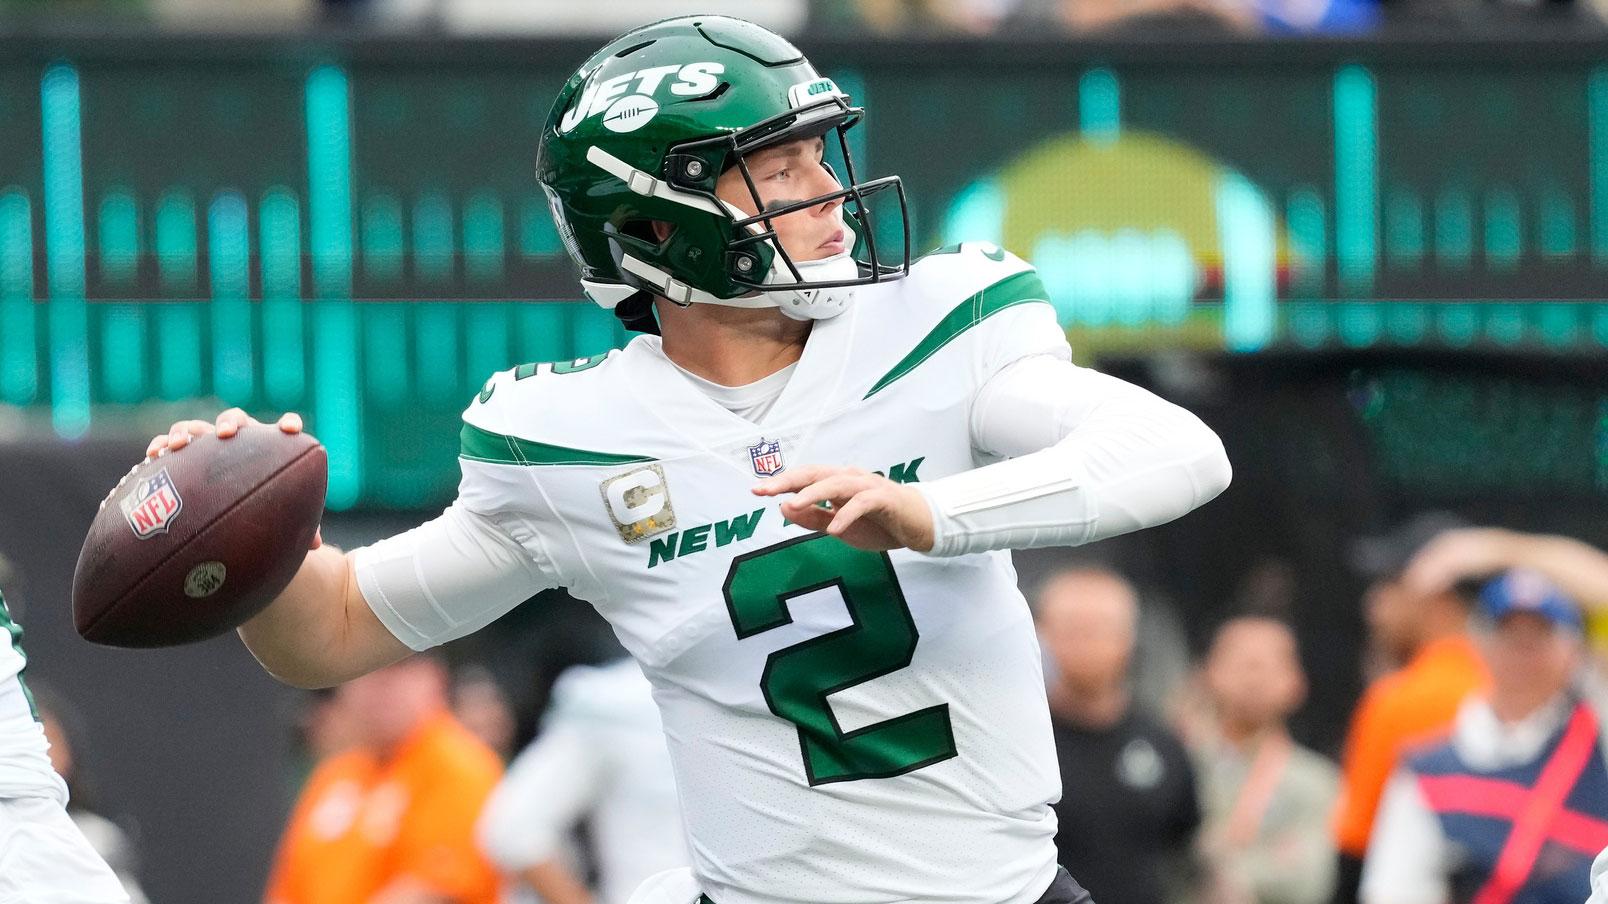 Nov 6, 2022; East Rutherford, NJ, USA; New York Jets quarterback Zach Wilson (2) throws in the first quarter against the Buffalo Bills at MetLife Stadium. / Robert Deutsch-USA TODAY Sports